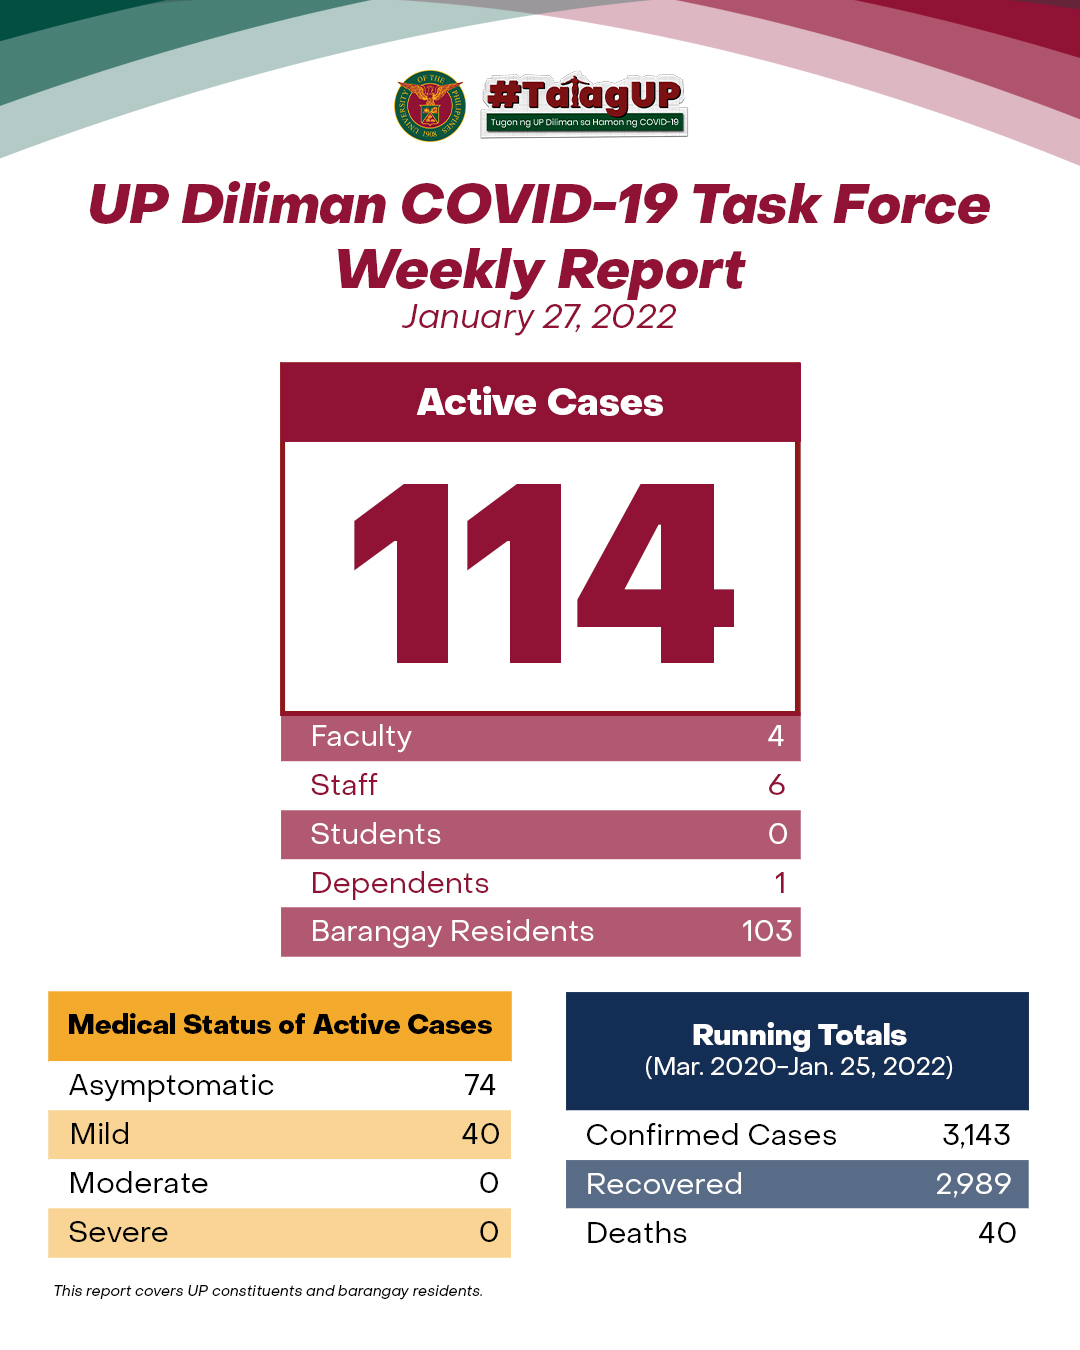 UP Diliman COVID-19 Task Force Weekly Report (January 27, 2022)